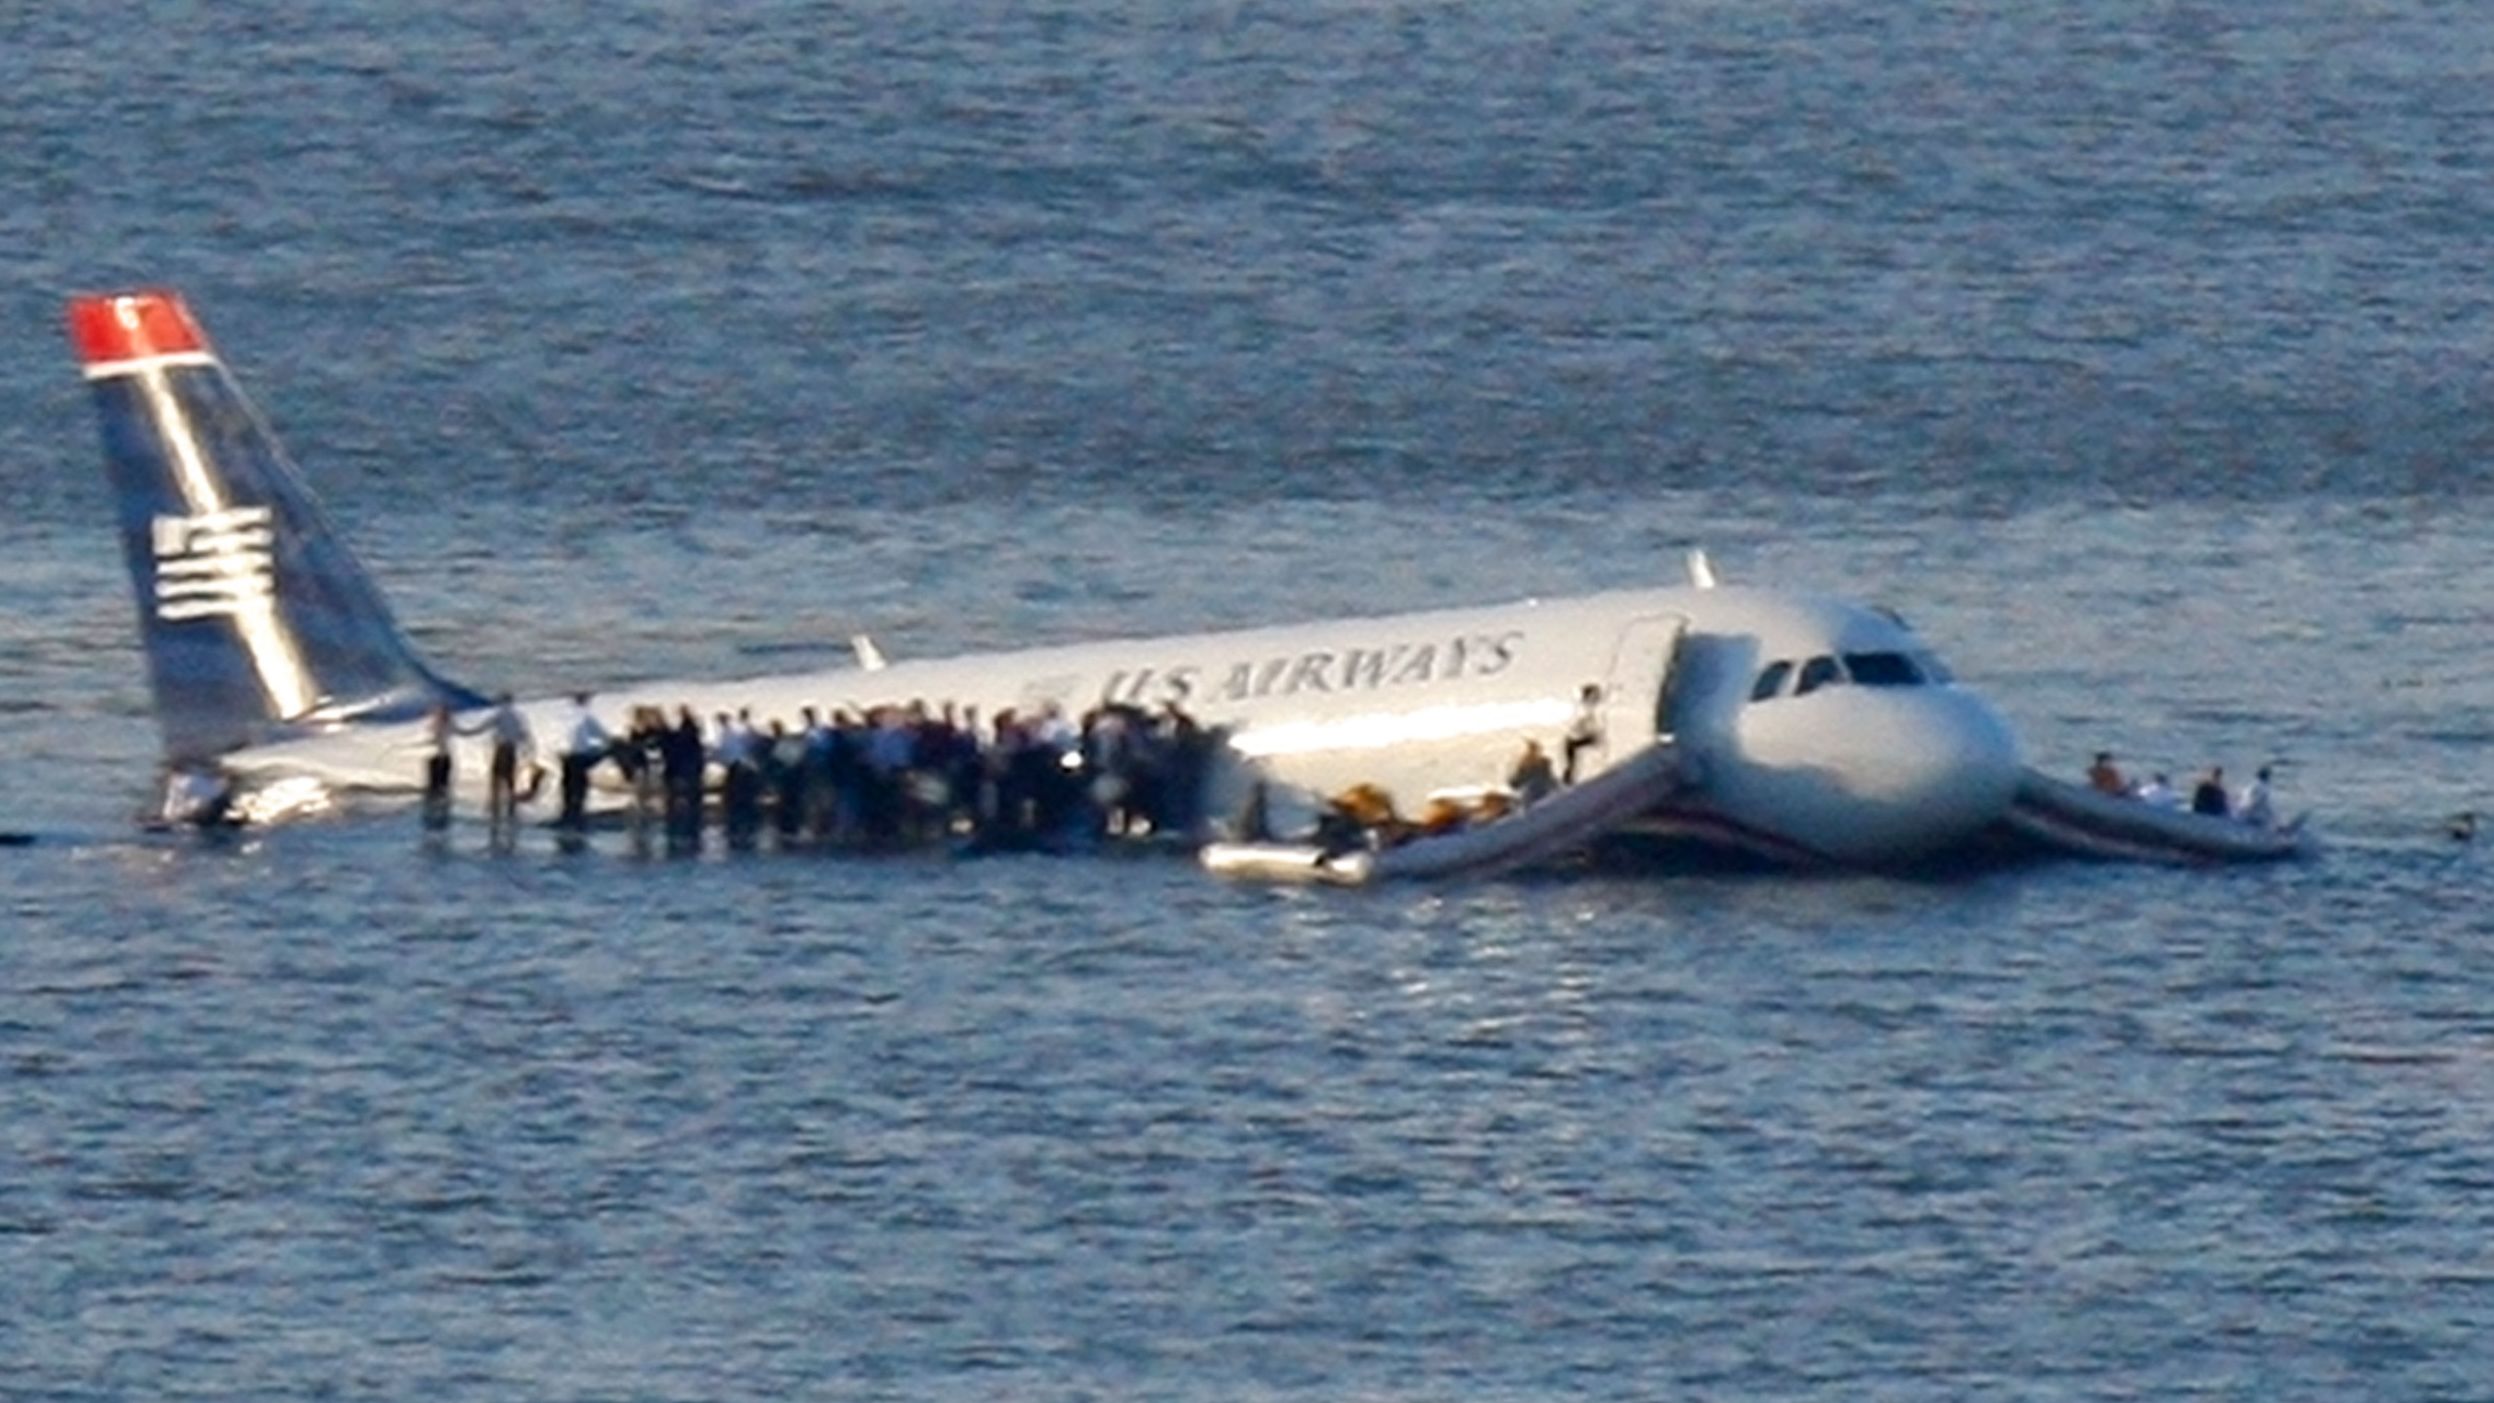 Passengers stand on the wings of a U.S. Airways plane as a ferry pulls up to it after it landed in the Hudson River in New York, January 15, 2009.  Local media said the plane was an Airbus with 146 passengers and five crew which had just taken off from La Guardia Airport and was trying to return after apparently striking a flock of birds.   REUTERS/Brendan McDermid (UNITED STATES)  FOR BEST QUALITY ALSO SEE: GF2E51F1M4V01